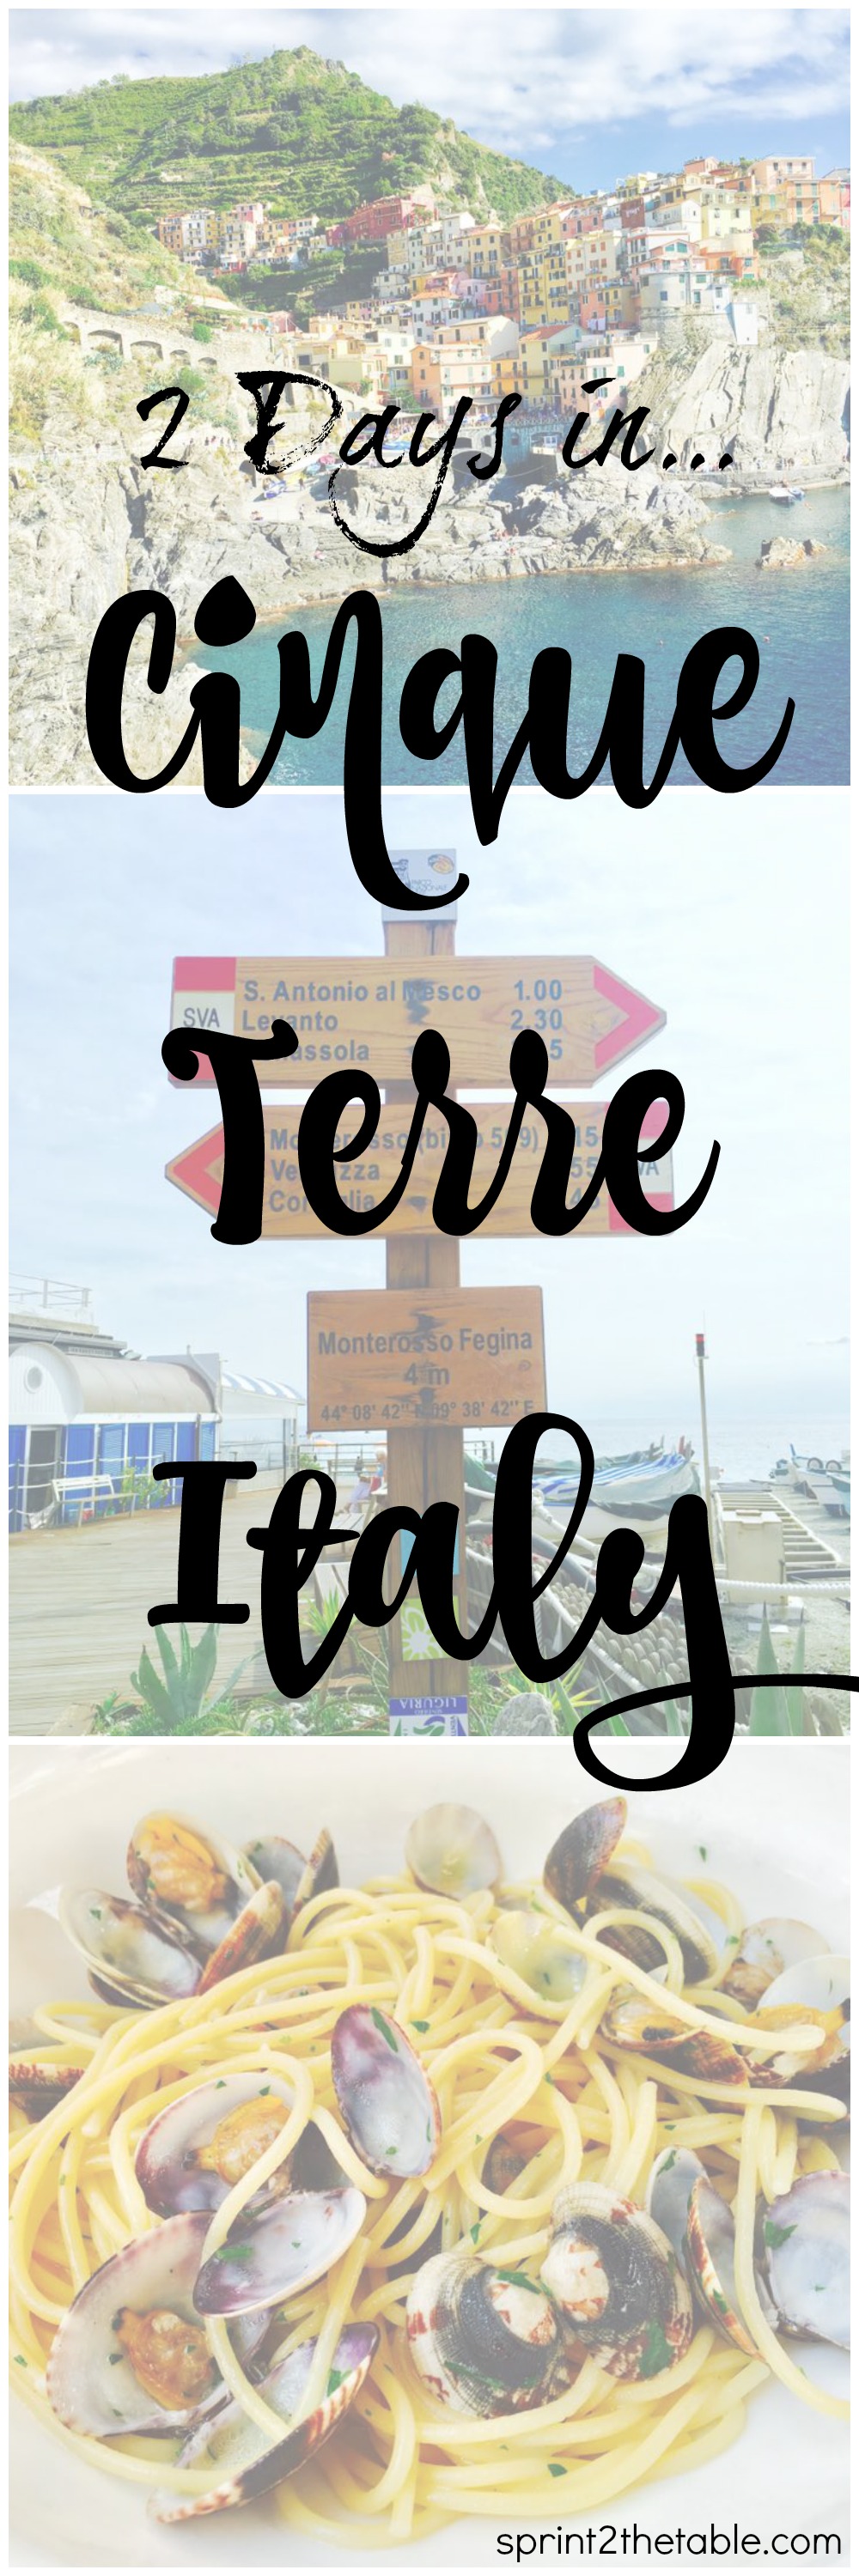 How to spend the perfect 2 days exploring, hiking, and eating your way through Cinque Terre, Italy!